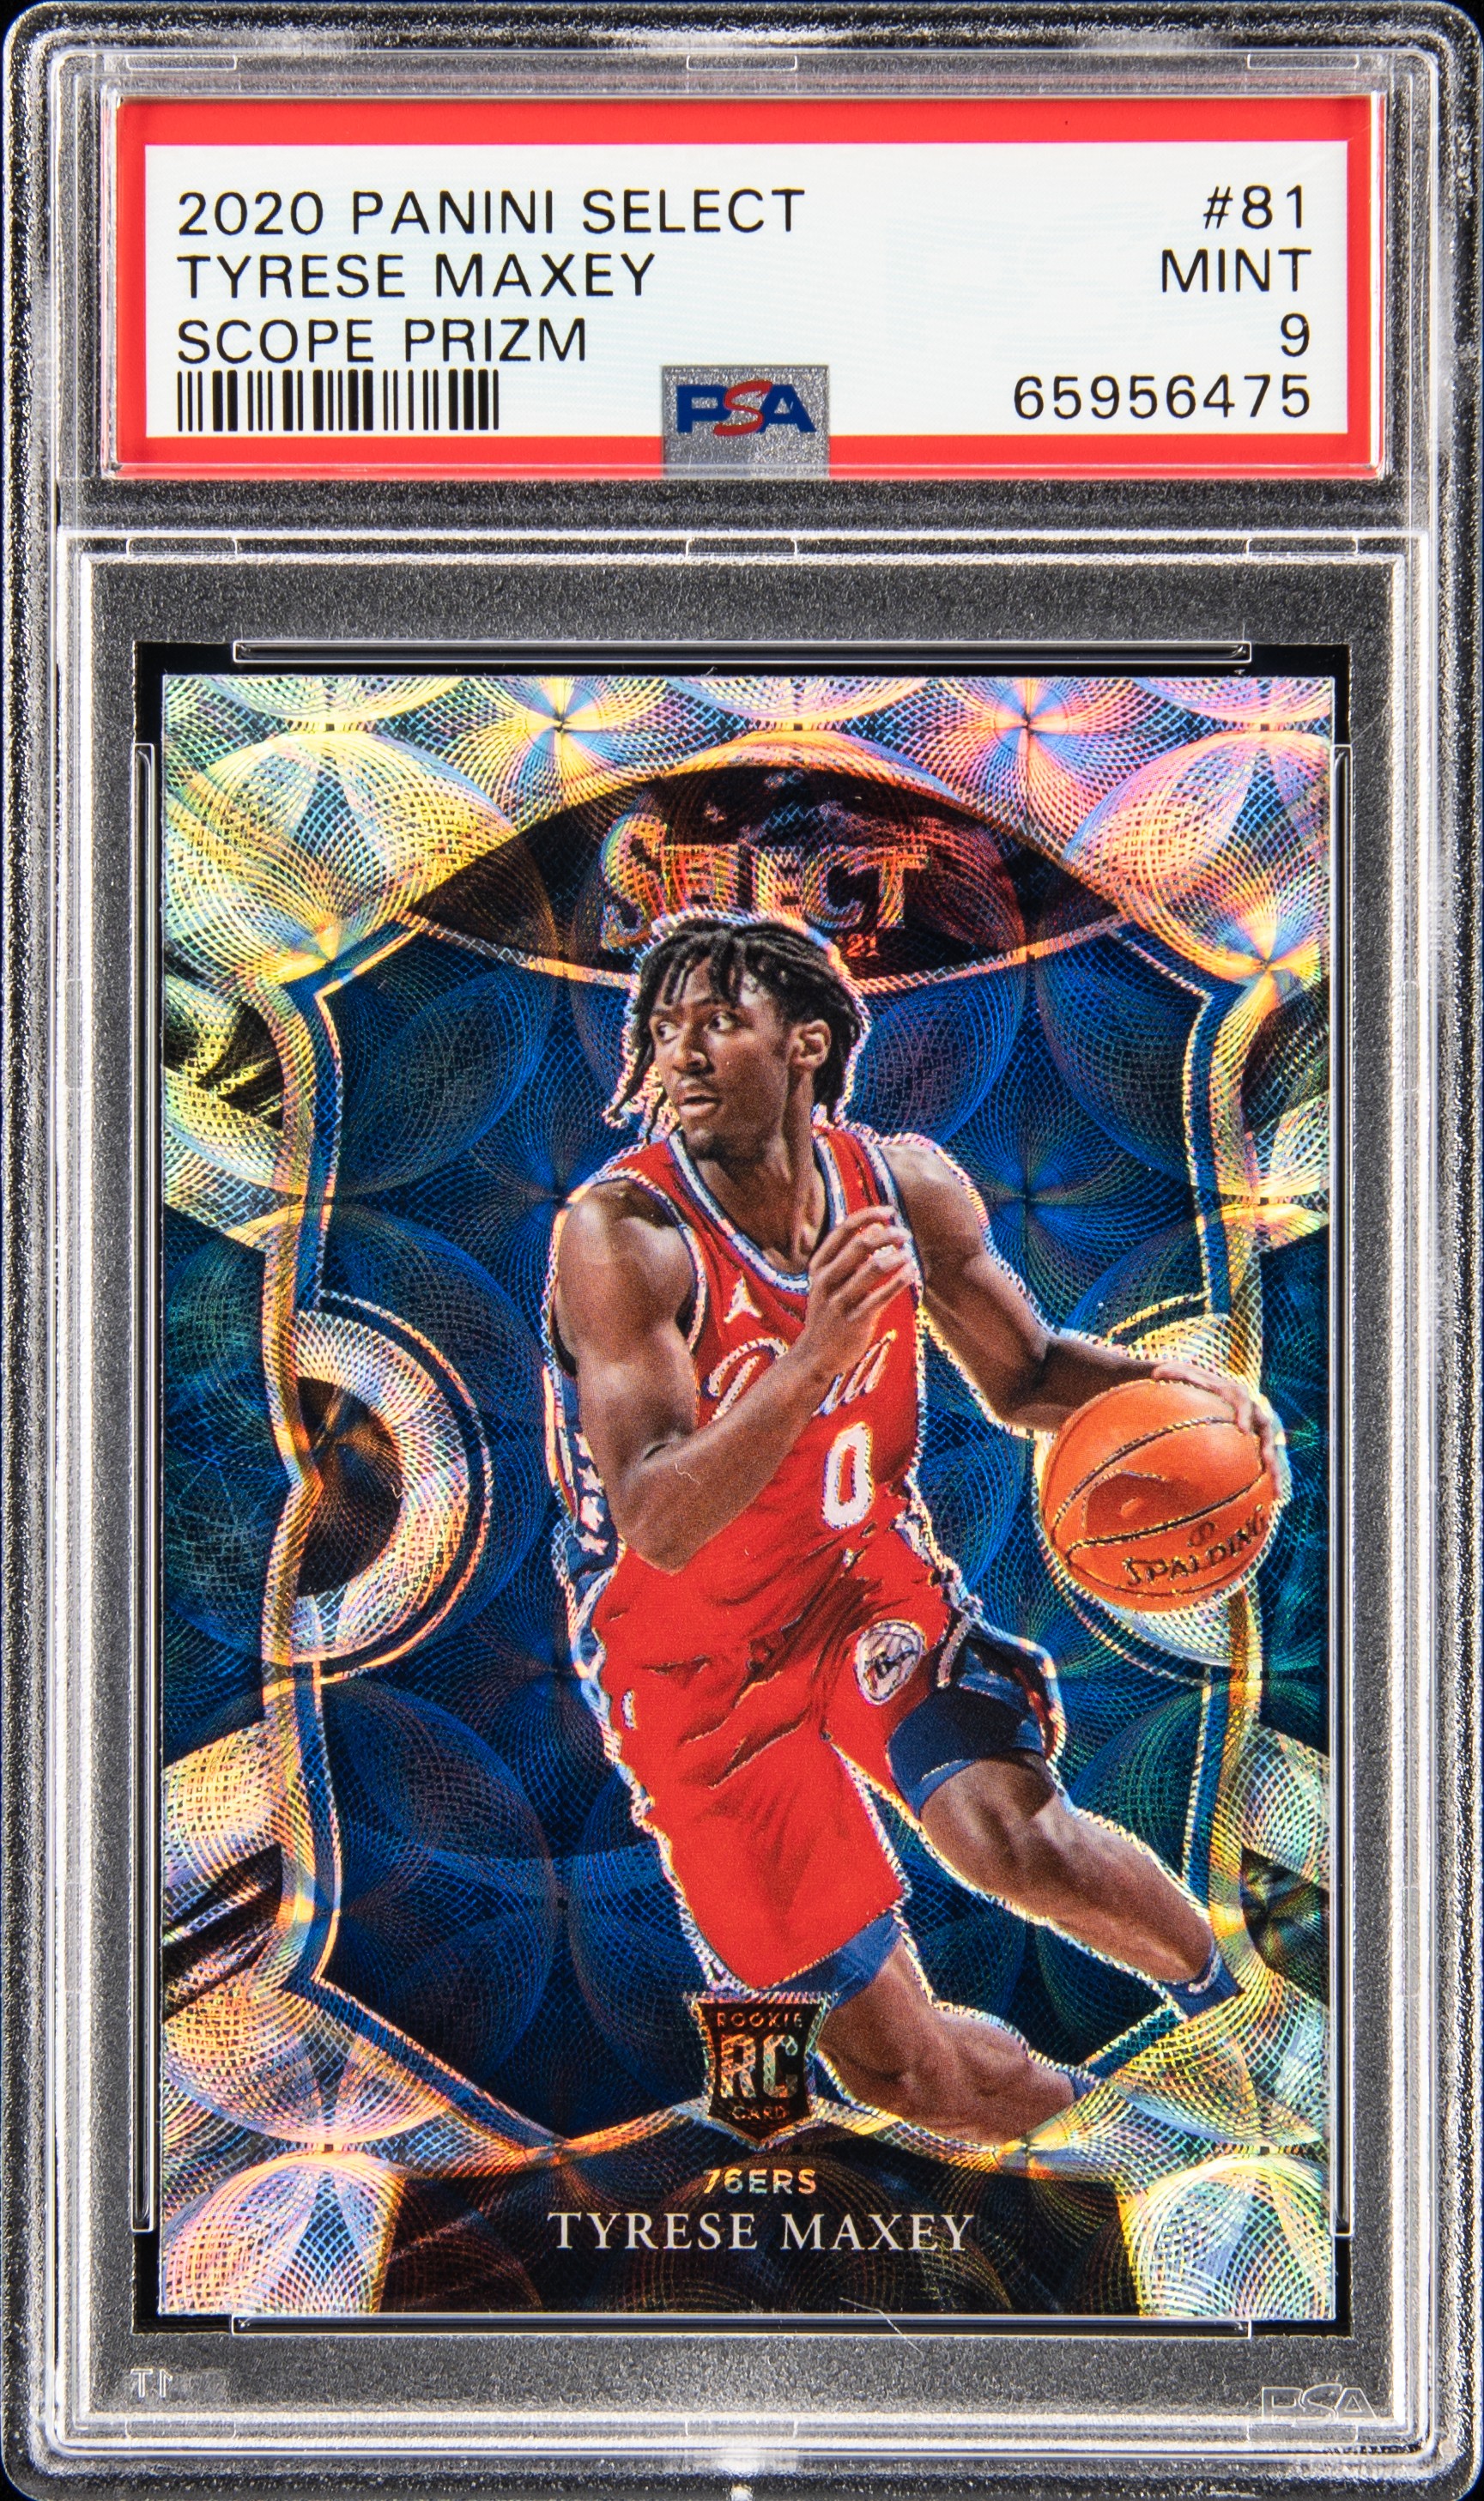 2020 Panini Select Scope Prizm 81 Tyrese Maxey Rookie Card – PSA MINT 9